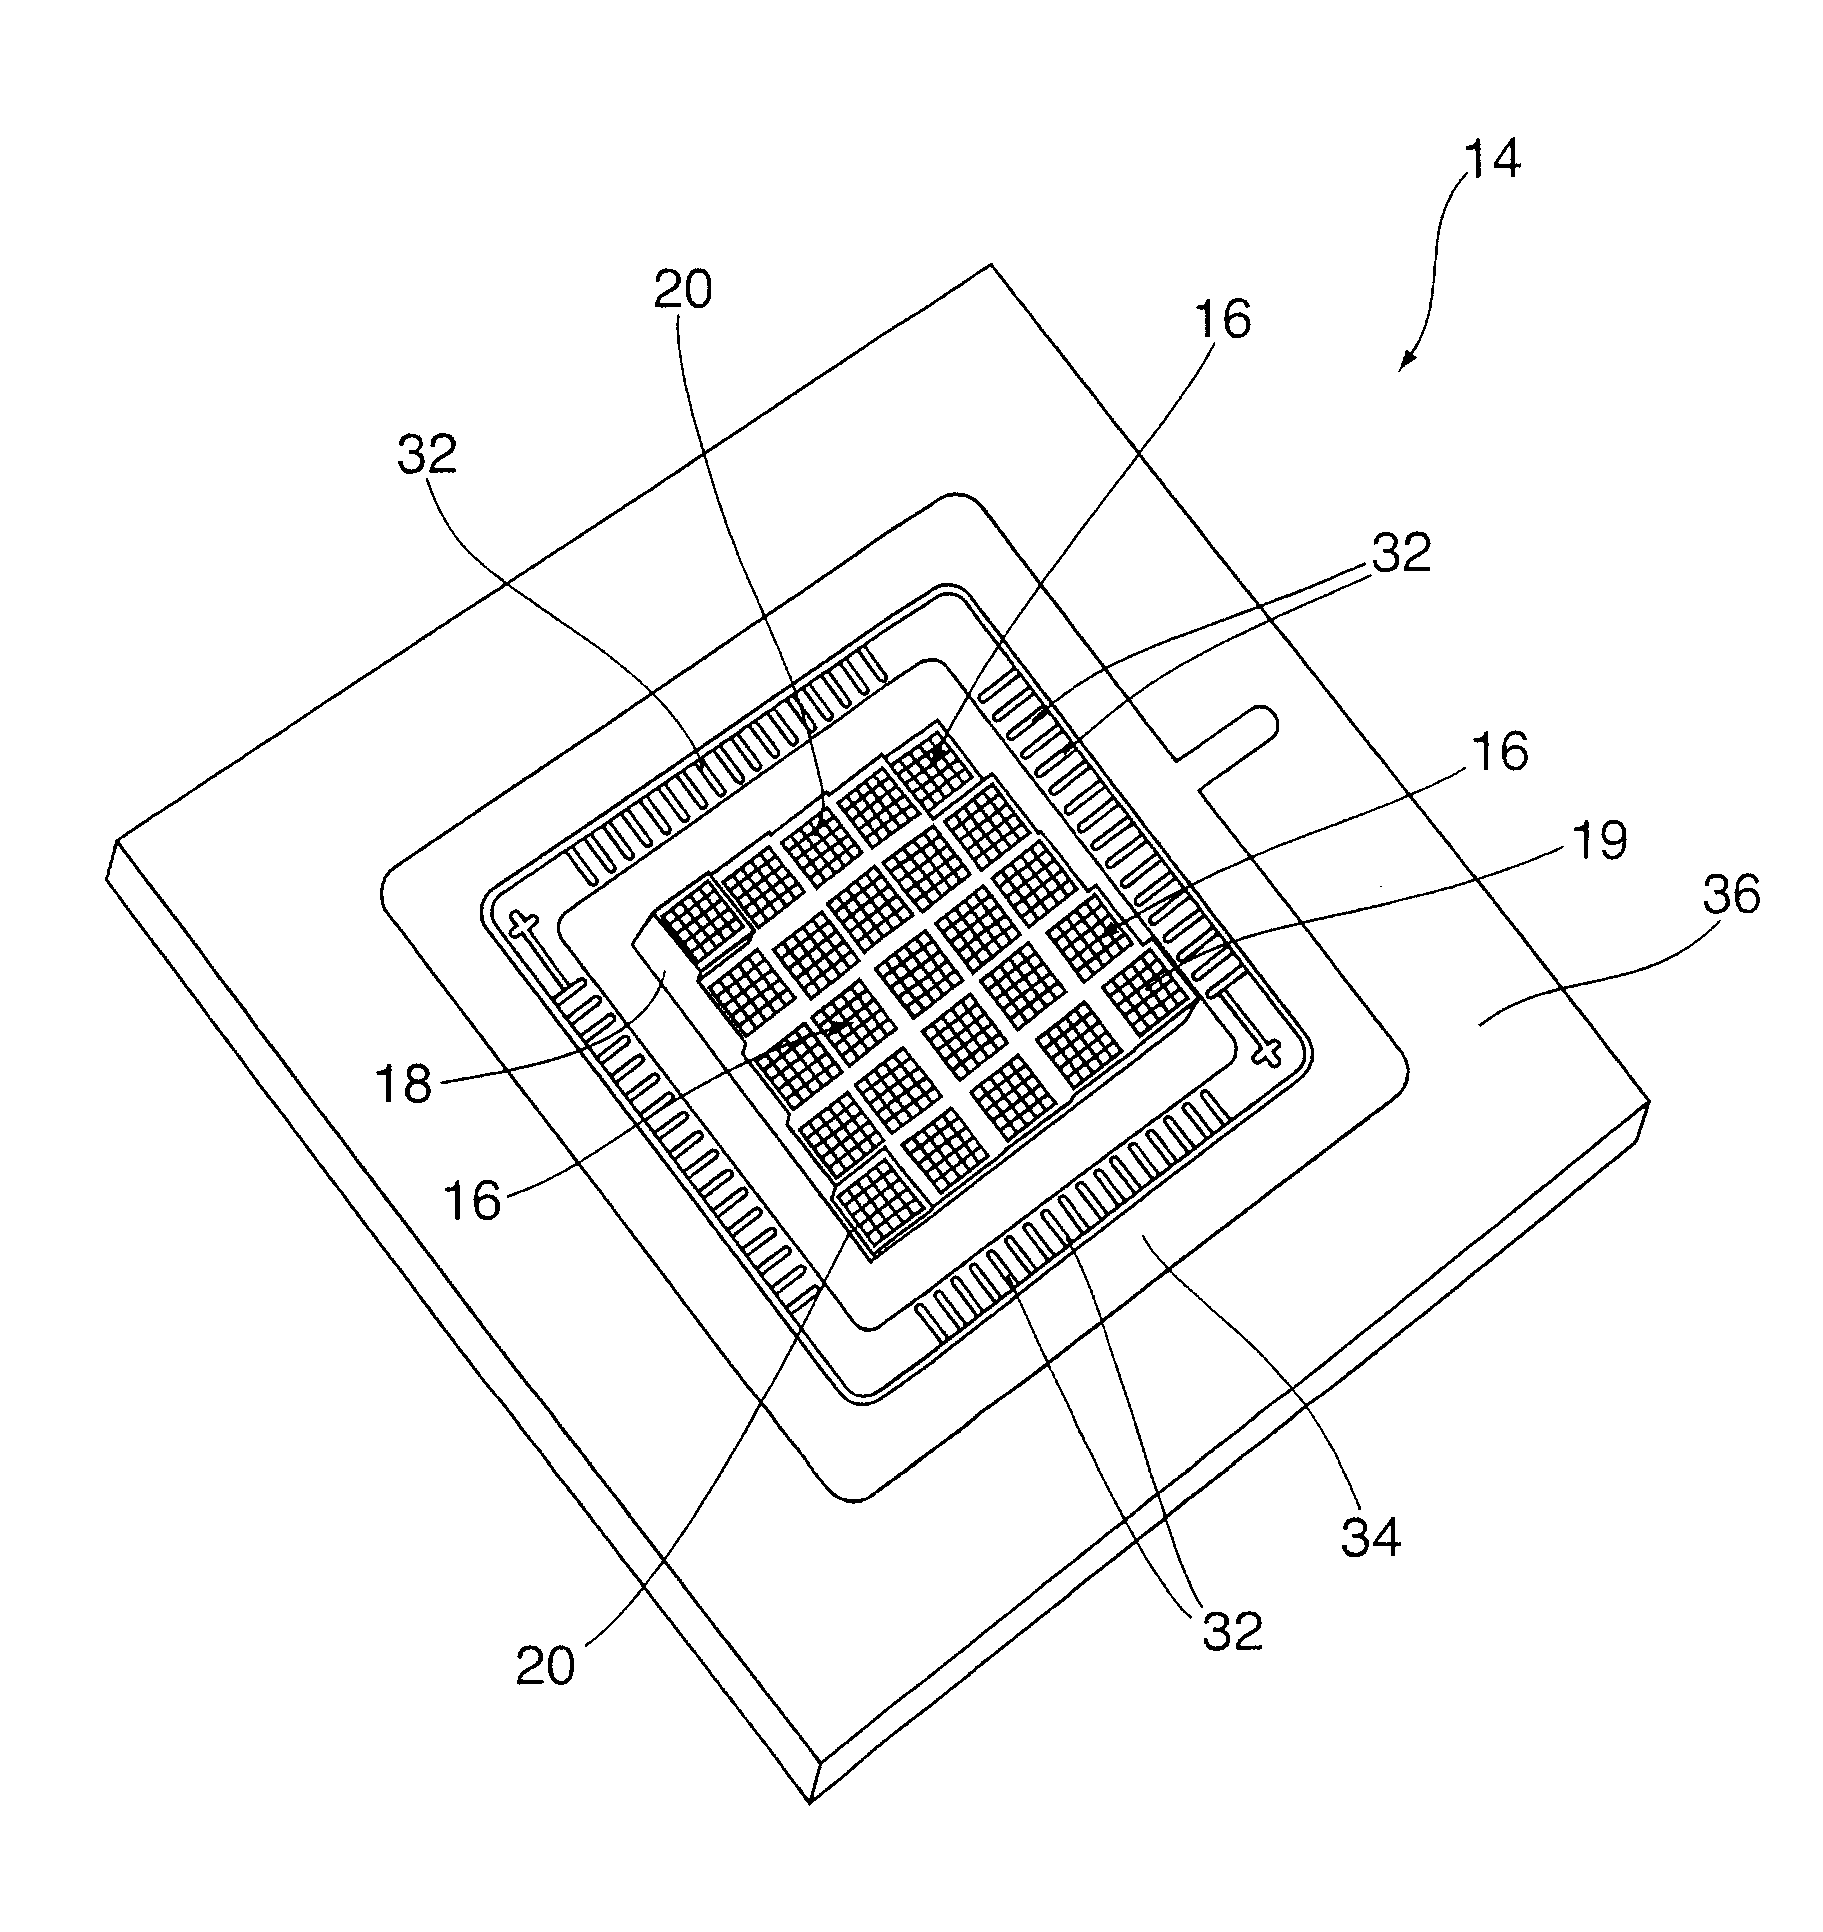 Ultrasonic Sensor Microarray and its Method of Manufacture